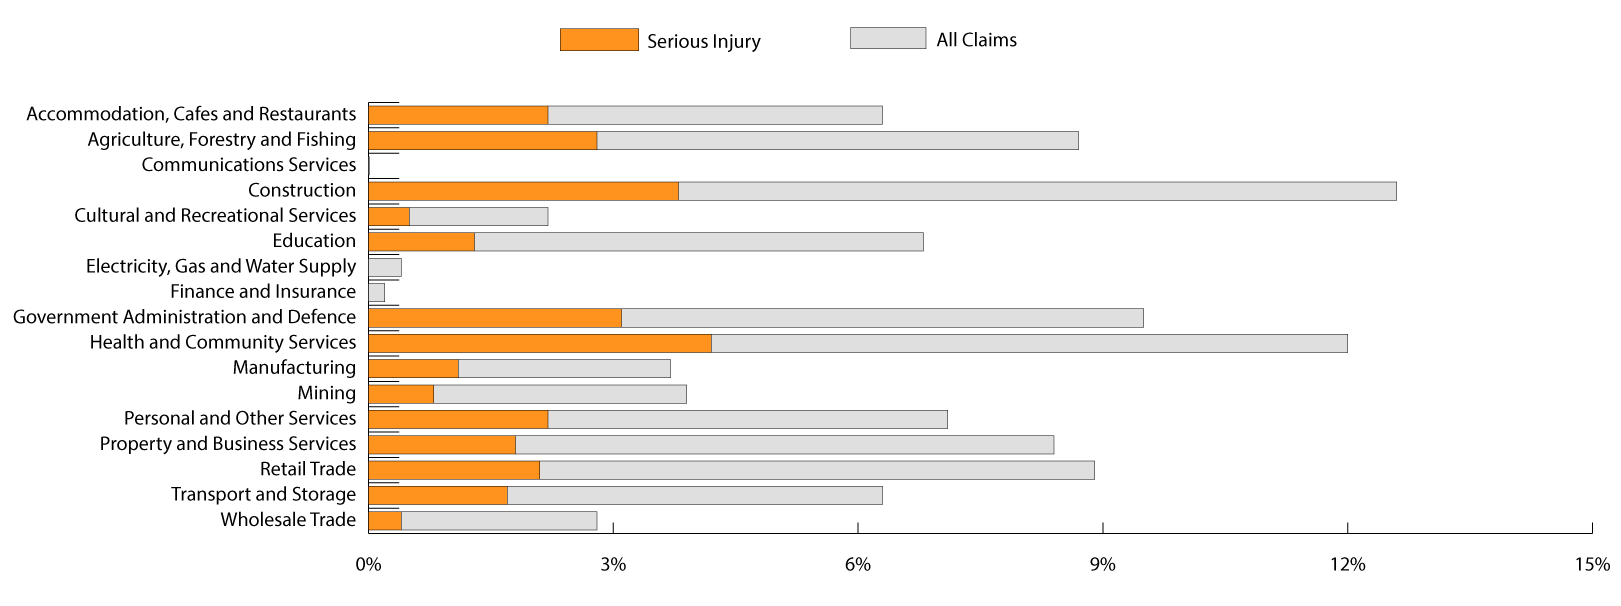 This bar graph shows the breakdown of workers compensation claims by Industry Groups. Accommodation, cafes and restaurants accounted for 6.3% of all Territory workers compensation claims, with 34.5% of those claims for a serious injury. Agriculture forestry & fishing accounted for 8.8% of all Territory workers compensation claims, with 32.5% of those claims for a serious injury. Communications services 0.02% of all Territory workers compensation claims, with 25% of those claims for a serious injury. Construction accounted for 12.5% of all Territory workers compensation claims, with 30.2% of those claims for a serious injury. Cultural and recreational services accounted for 2.2% of all Territory workers compensation claims, with 24.5% of those claims for a serious injury. Education accounted for 6.8% of all Territory workers compensation claims, with 18.8% of those claims for a serious injury. Electricity, gas and water supply accounted for 0.5% of all Territory workers compensation claims, with 10% of those claims for a serious injury. Finance and insurance accounted for 0.2% of all Territory workers compensation claims, with 20% of those claims for a serious injury. Government administration and defence accounted for 9.5% of all Territory workers compensation claims, with 32.7% of those claims for a serious injury. Health and community services accounted for 12.1% of all Territory workers compensation claims, with 35.1% of those claims for a serious injury. Manufacturing accounted for 3.6% of all Territory workers compensation claims, with 30% of those claims for a serious injury. Mining accounted for 3.9% of all Territory workers compensation claims, with 21.2% of those claims for a serious injury. Personal and other services accounted for 7.1% of all Territory workers compensation claims, with 31% of those claims for a serious injury. Property and business services accounted for 8.4% of all Territory workers compensation claims, with 21.2% of those claims for a serious injury. Retail trade accounted for 8.9% of all Territory workers compensation claims, with 23.5% of those claims for a serious injury. Transport and storage accounted for 6.2% of all Territory workers compensation claims, with 27% of those claims for a serious injury. Wholesale trade accounted for 2.8% of all Territory workers compensation claims, with 14.8% of those claims for a serious injury.